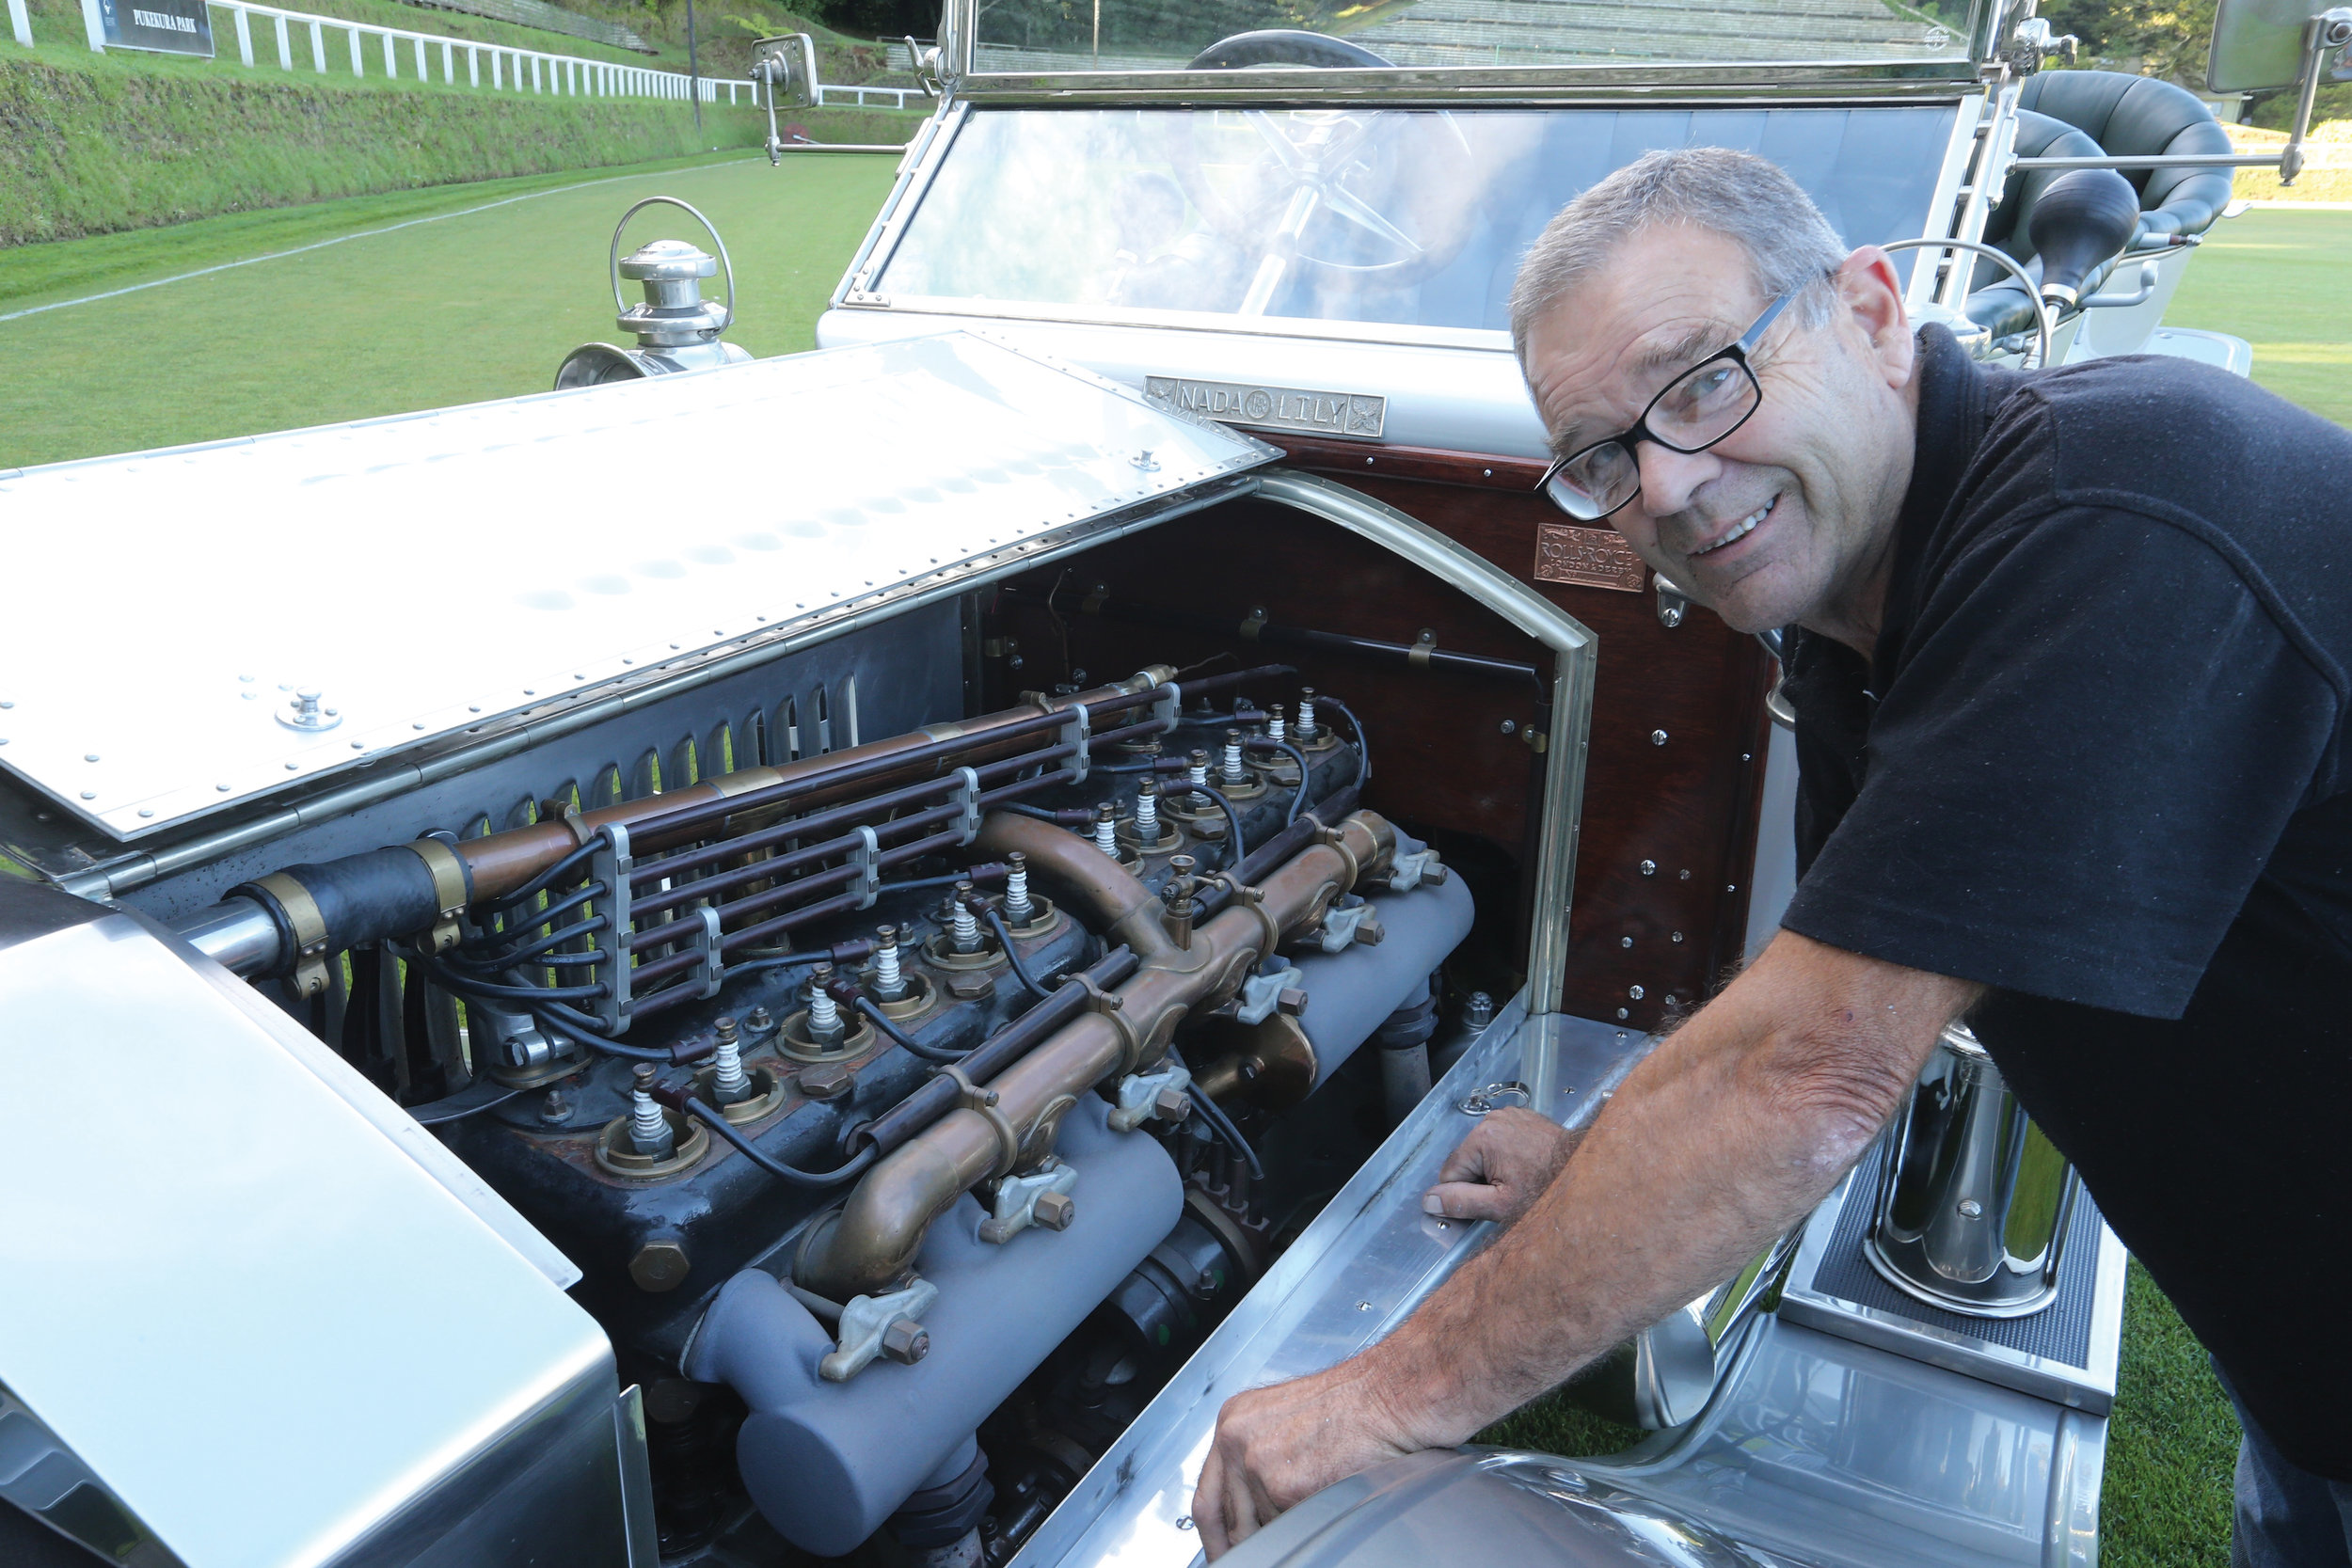 Checking out an engine is chief restorer of the three early Rollers Peter Pittwood who has worked on cars for the Simkin family for 35 years. A cabinetmaker by trade, he has restored all the woodwork on the cars and rebuilt the engines and gearboxes…